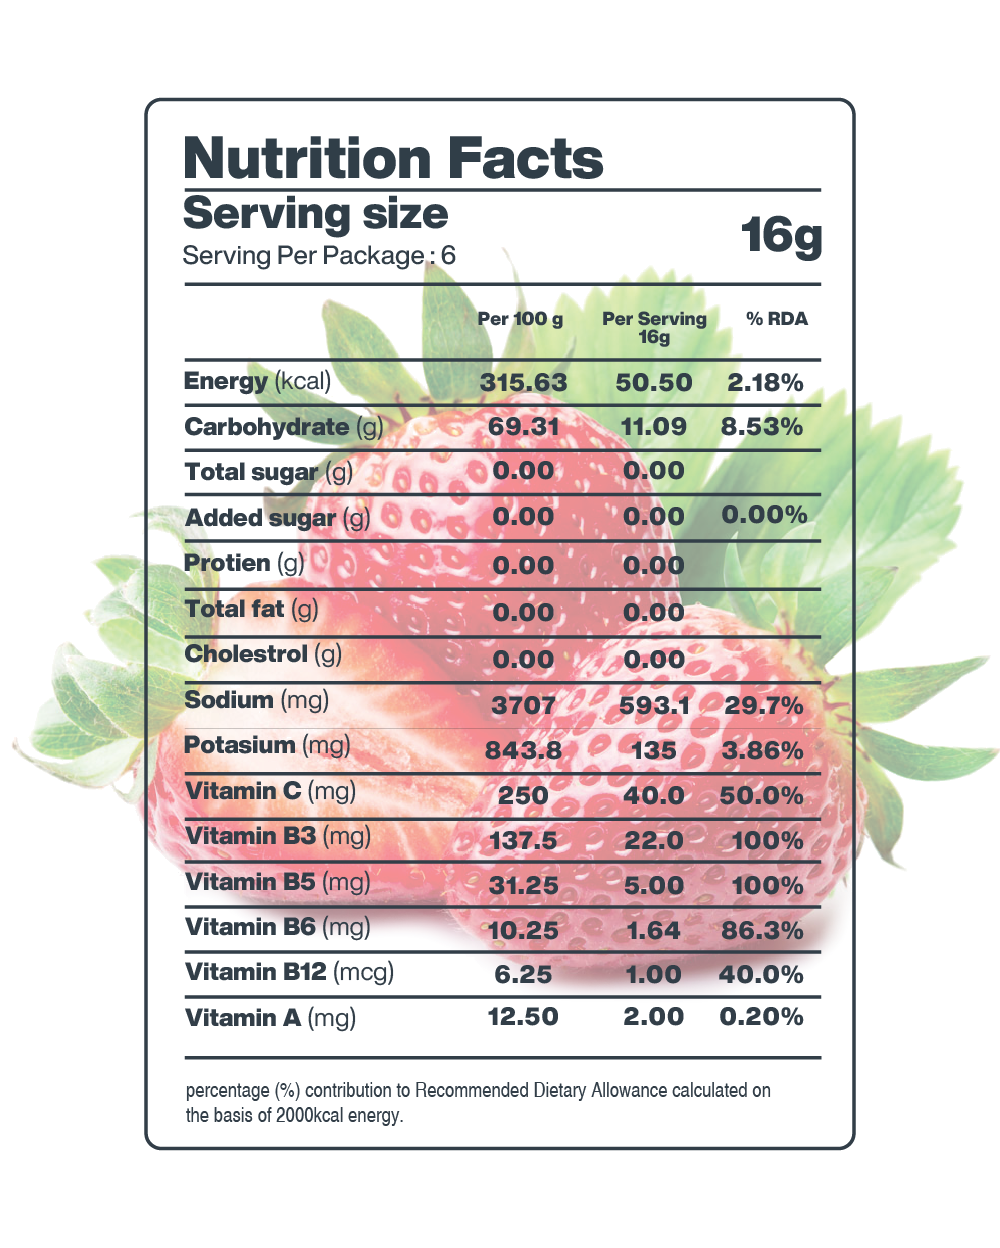 Product description: A nutrition label showing the nutritional facts of Moon Strawberry Lunar Hydration Booster from MOONFREEZE FOODS PRIVATE LIMITED.